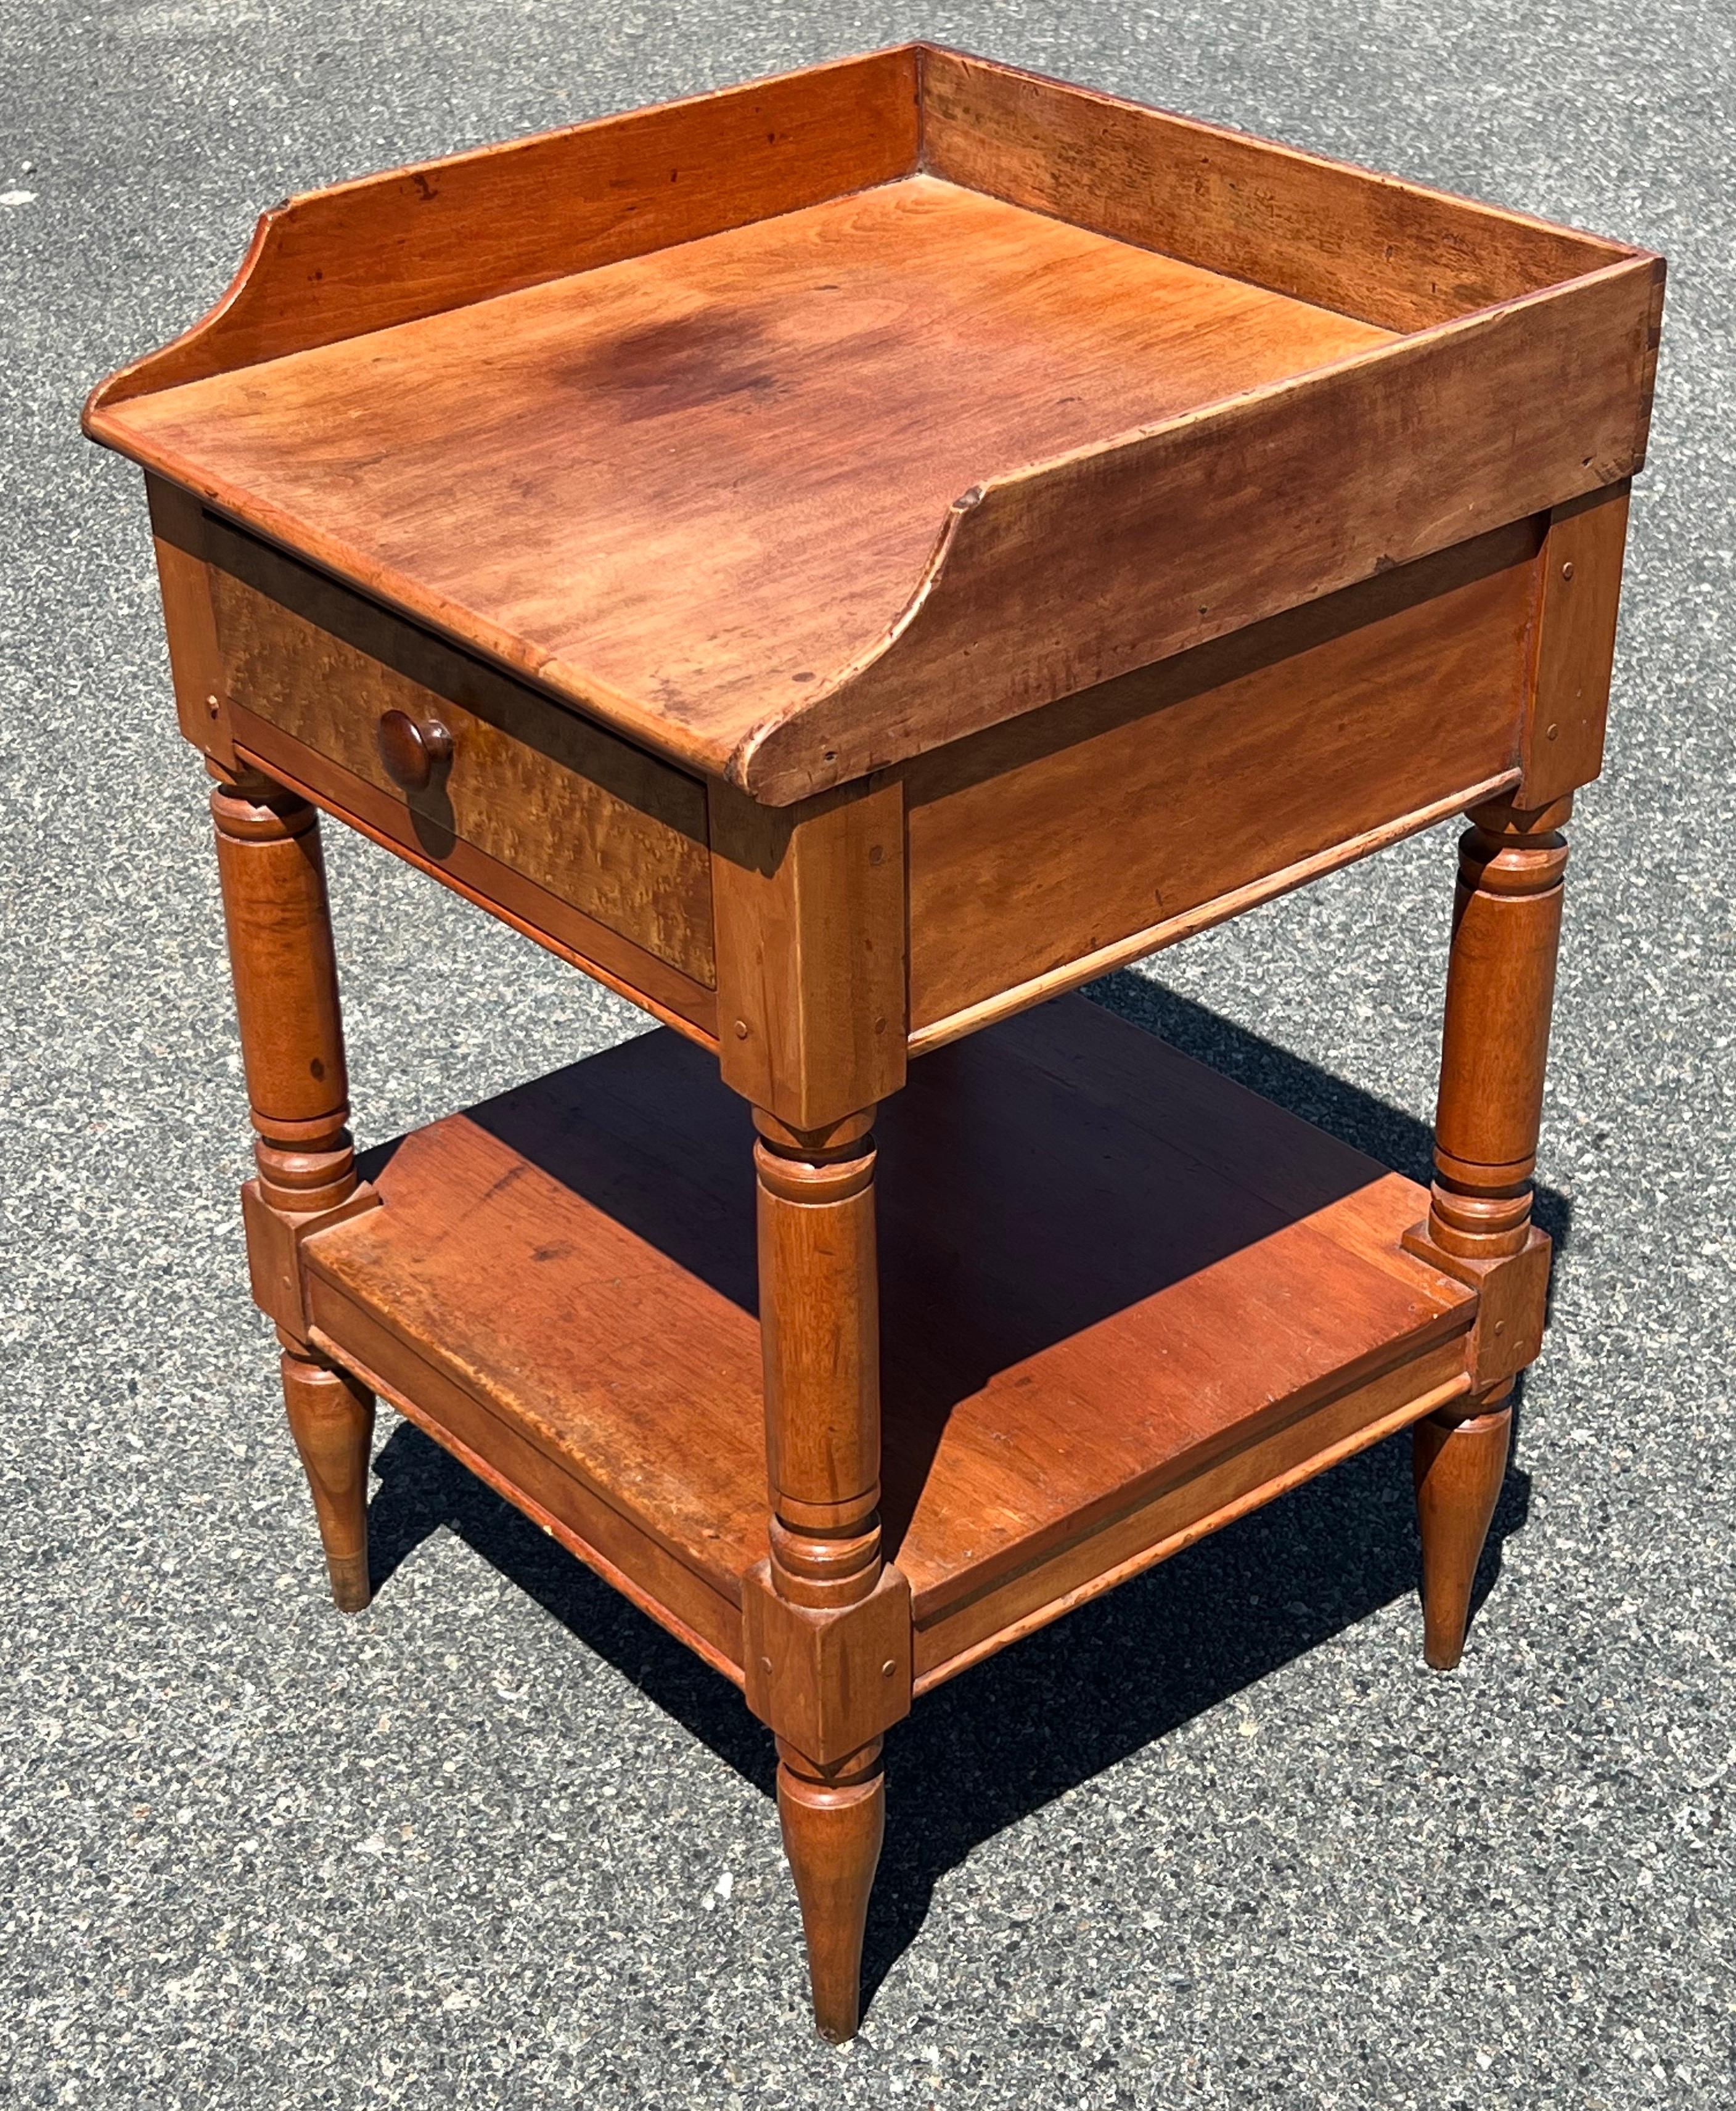 19th century two tier stand in birch. Upper gallery with shaped sides, single drawer with figured Birdseye Maple drawer front and turned wooden knob. With lower shelf and turned legs. Surface height 28.25 inches.